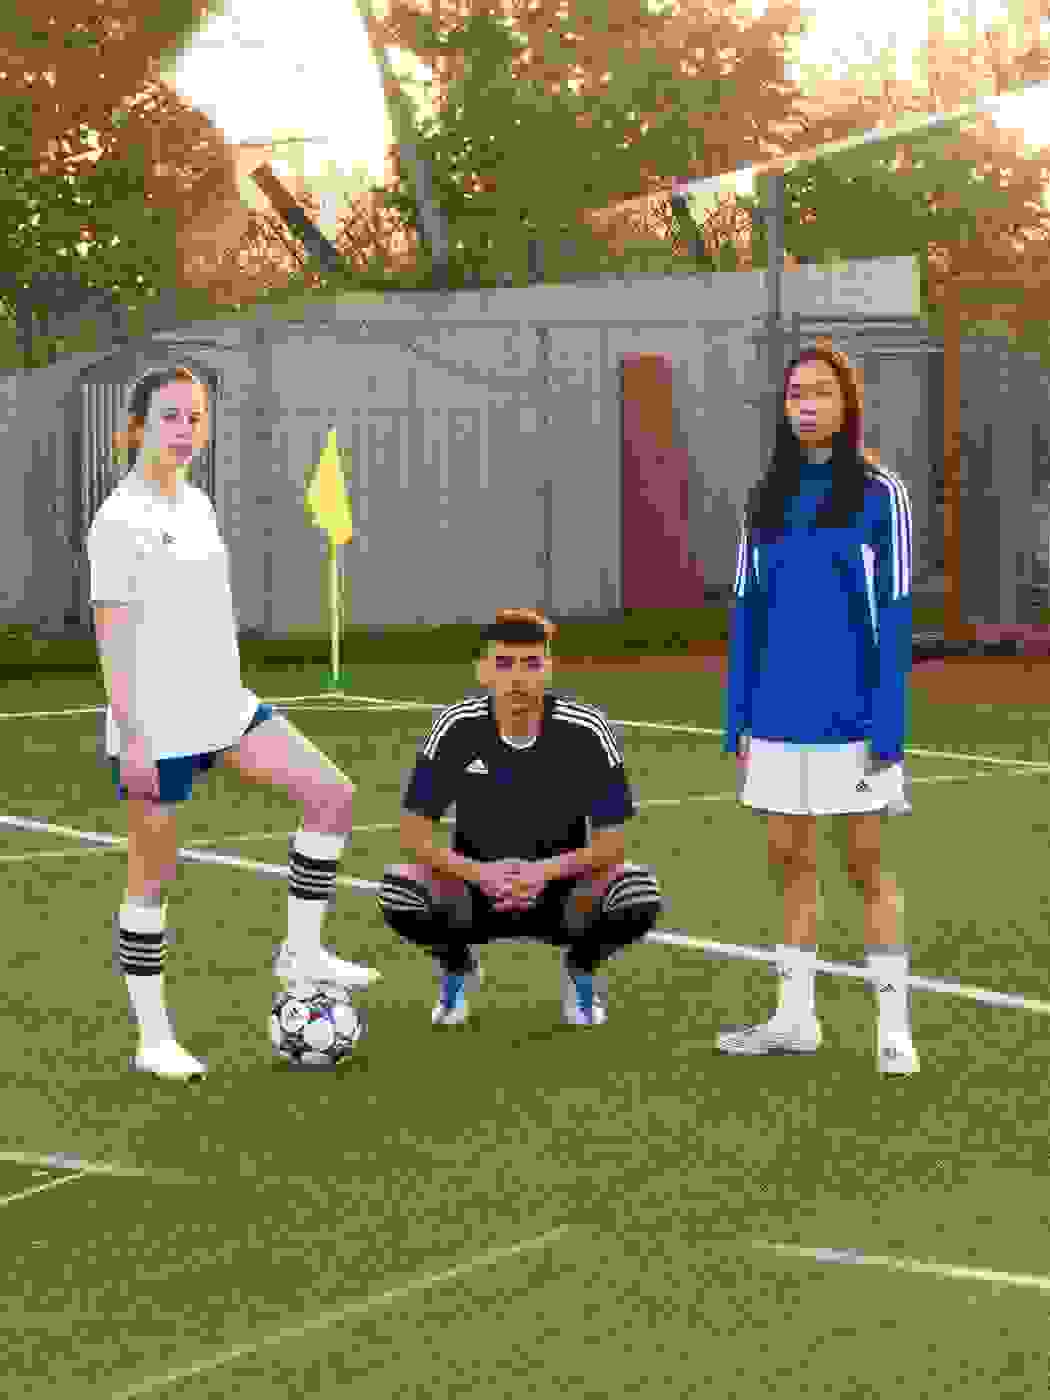 Image of 3 players, 2 females, one male posing on the pitch, kits on, female on the left hand side has the ball.